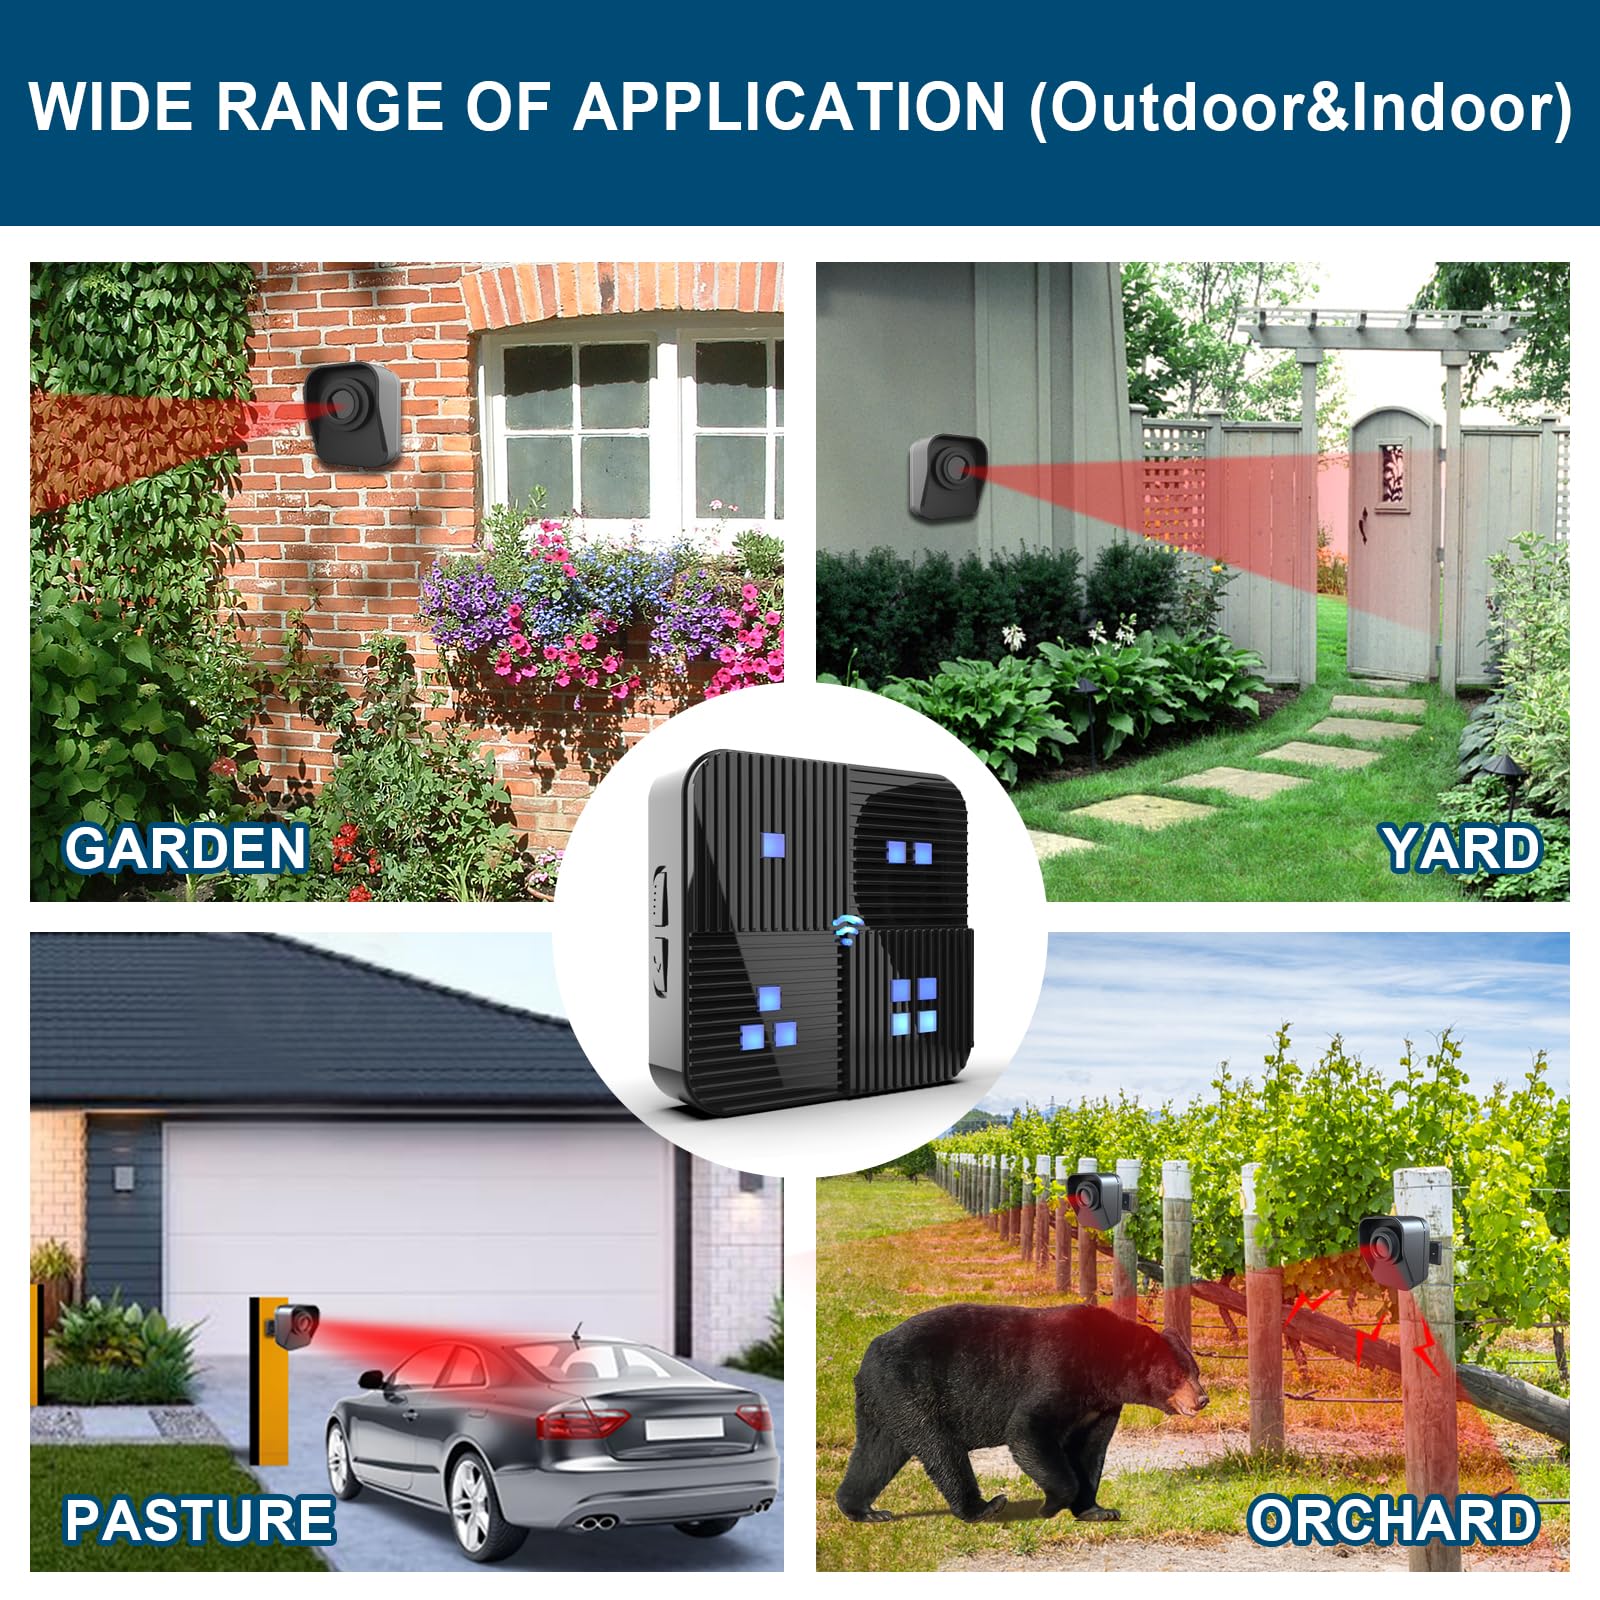 DallTou Wireless Driveway Alarm: Long-Range Security Alert System for All-Weather Protection - Enhance Property Security Inside and Out